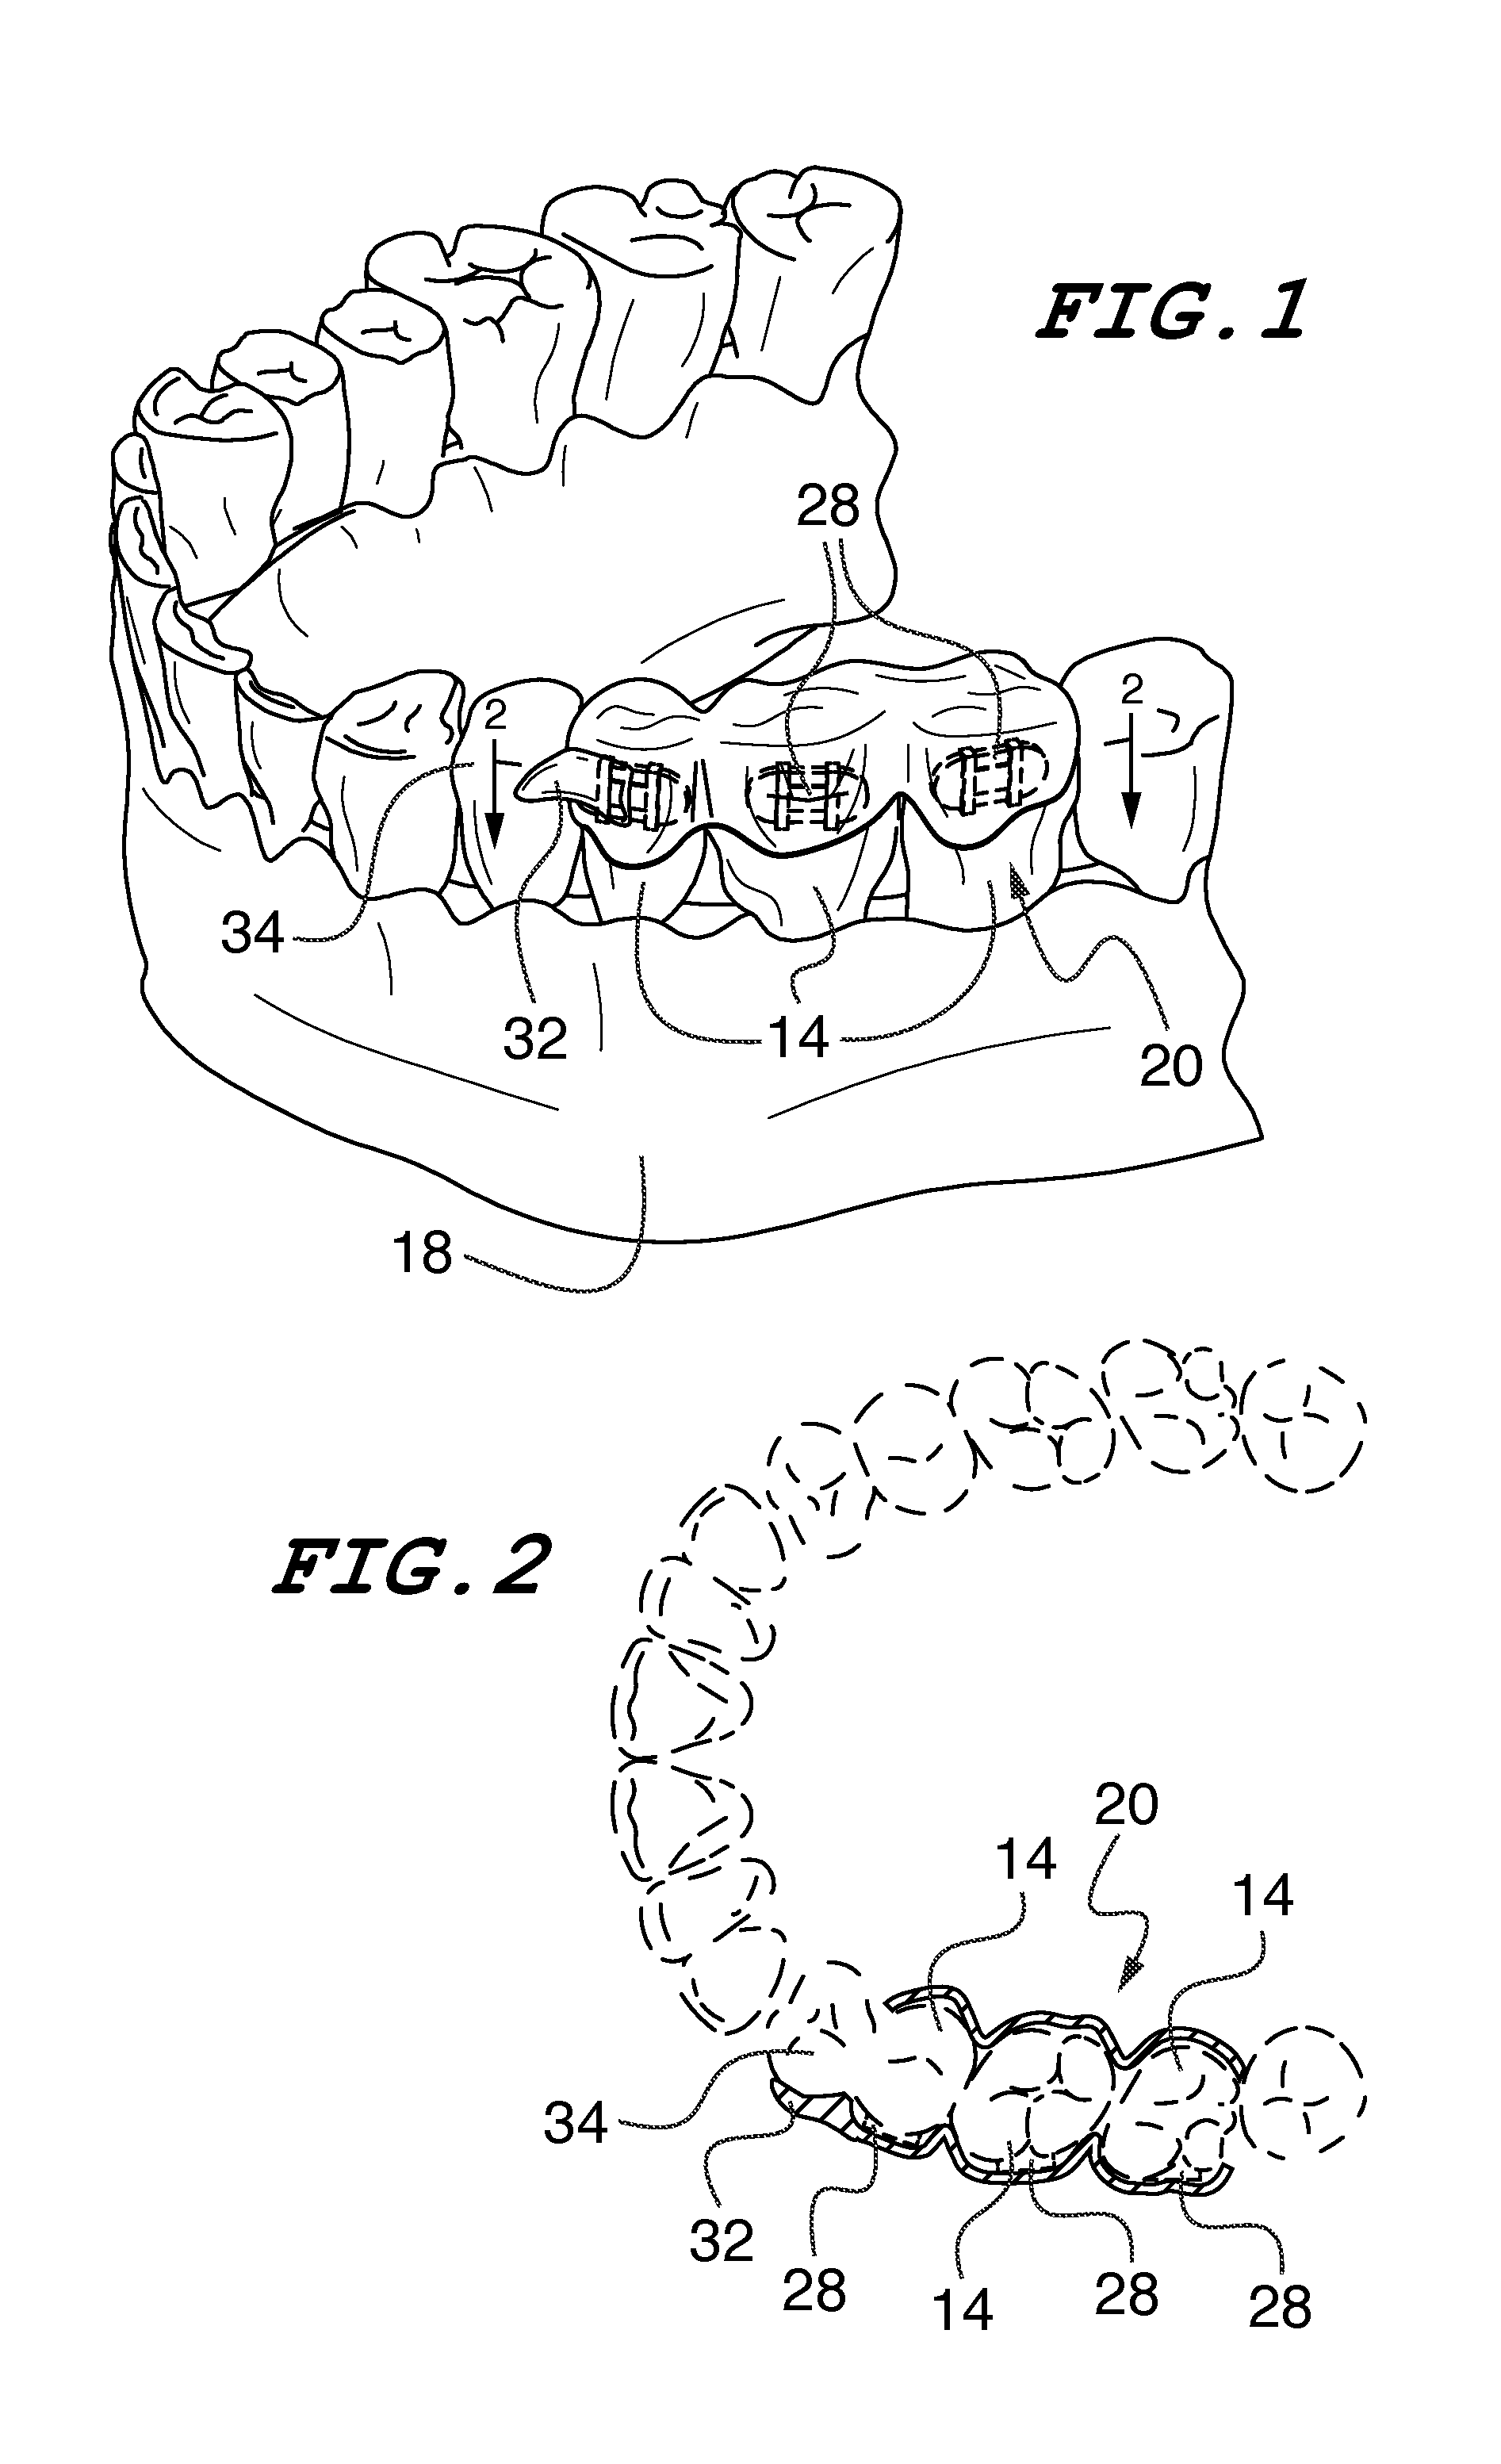 Orthodontic indirect bonding tray including stabilization features